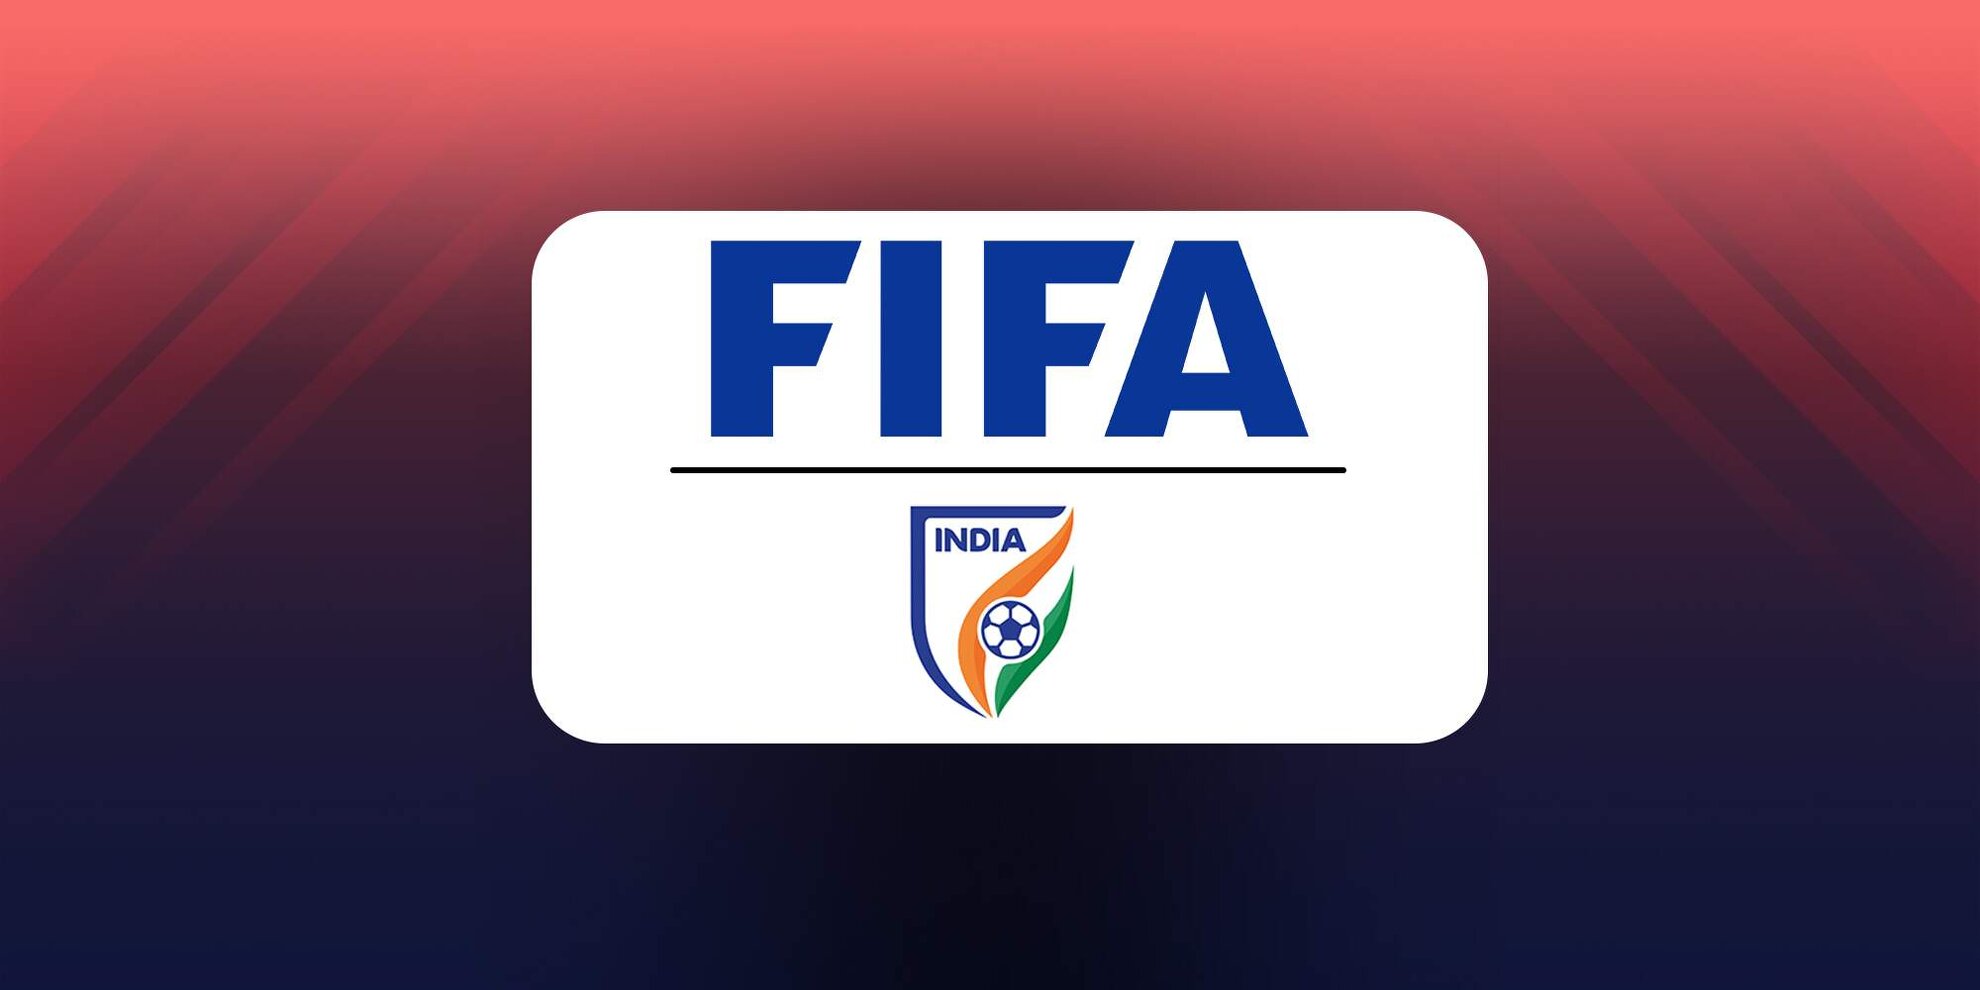 Why getting a FIFA ban will likely be troublesome for Indian soccer?